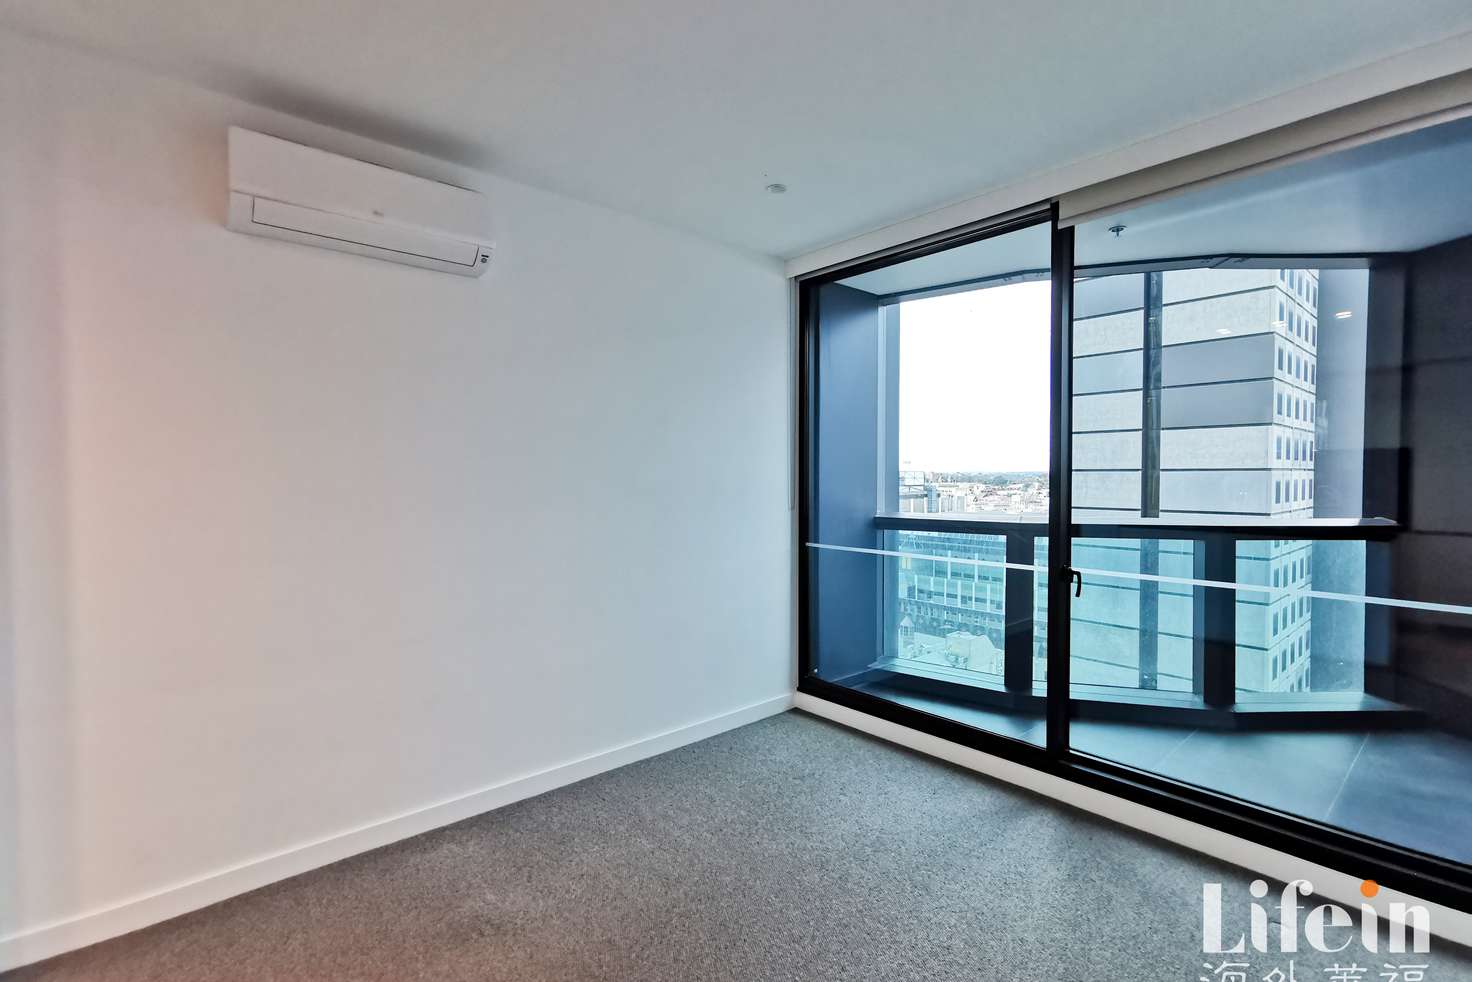 Main view of Homely apartment listing, 1907/224 La Trobe Street, Melbourne VIC 3000